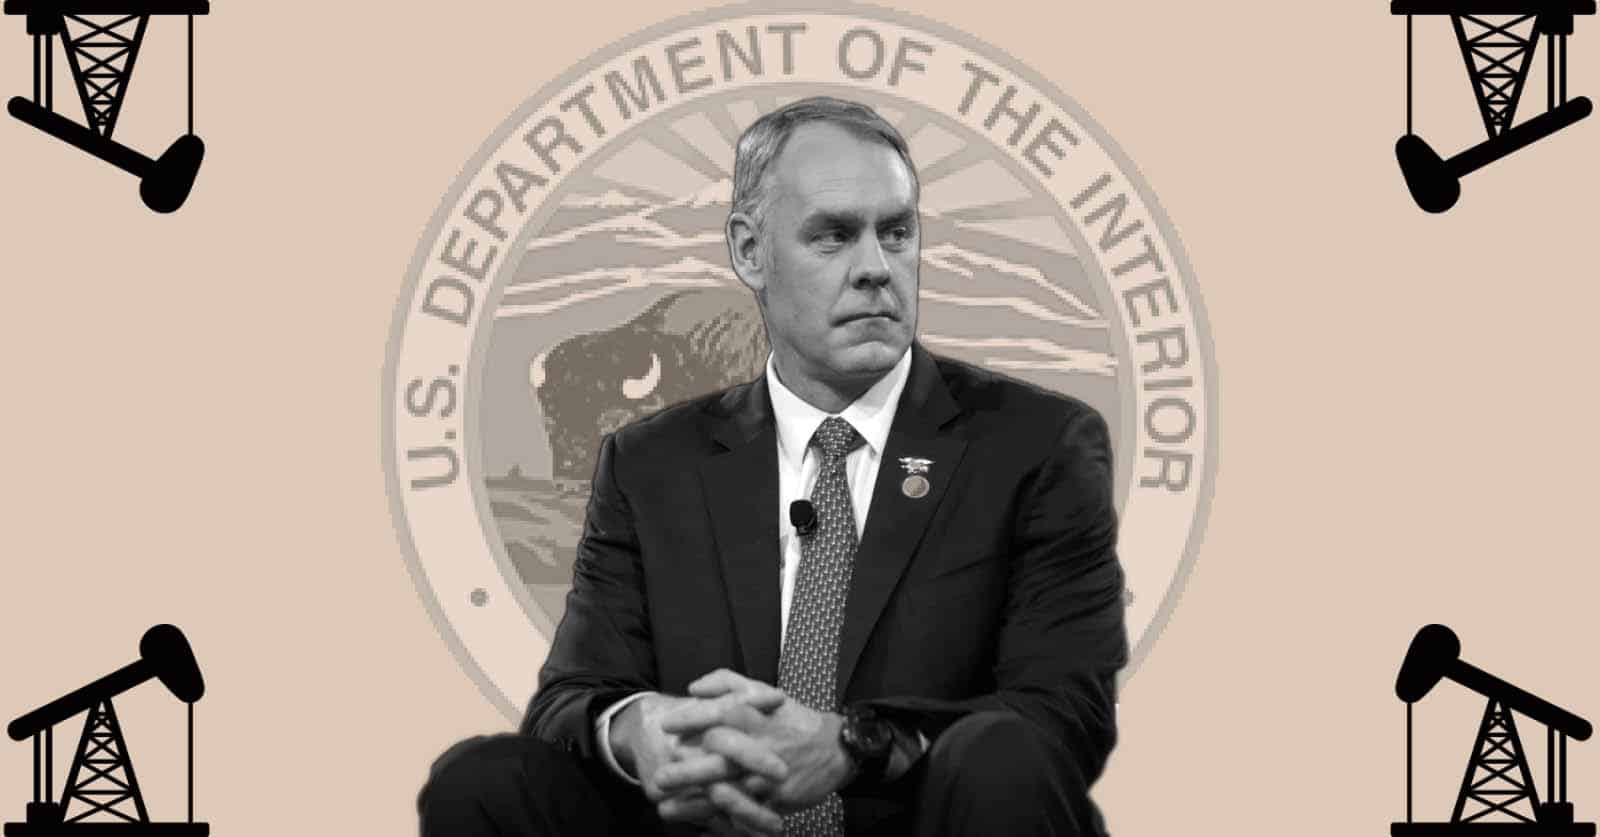 Will Interior Secretary Zinke live up to expectation on oil and gas?